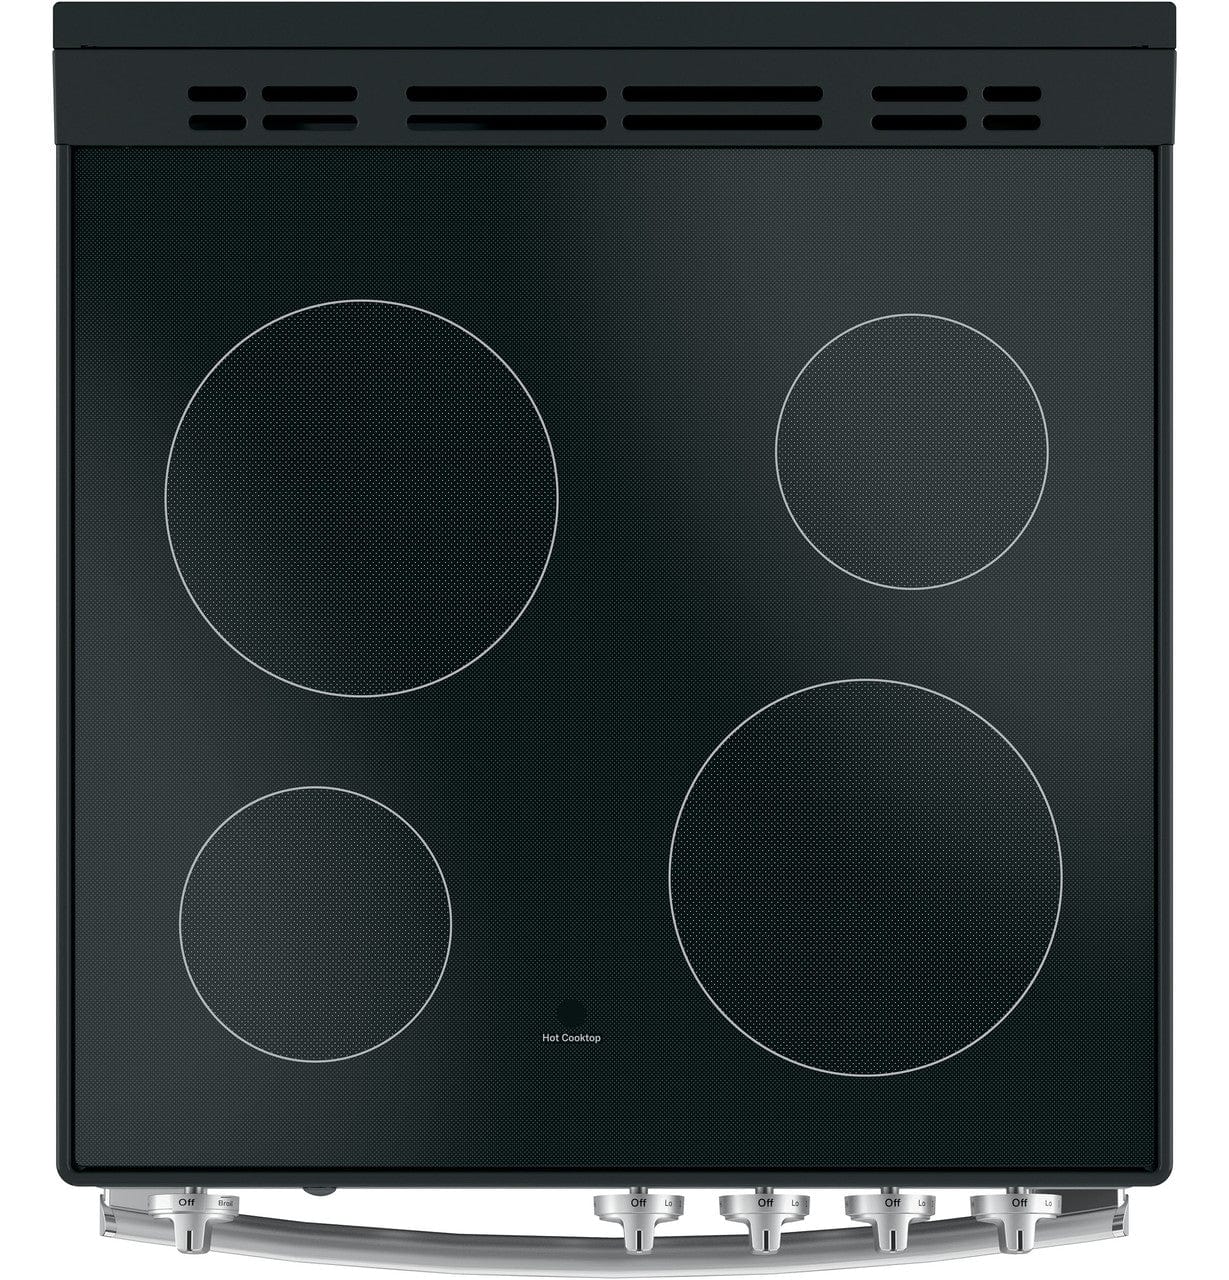 GE JCAS640RMSS Range, 24" Exterior Width, Electric Range, Glass Burners (Electric), 4 Burners, 2.9 cu. ft. Capacity, Storage Drawer, 1 Ovens, 2000W, Front Controls, Stainless Steel colour